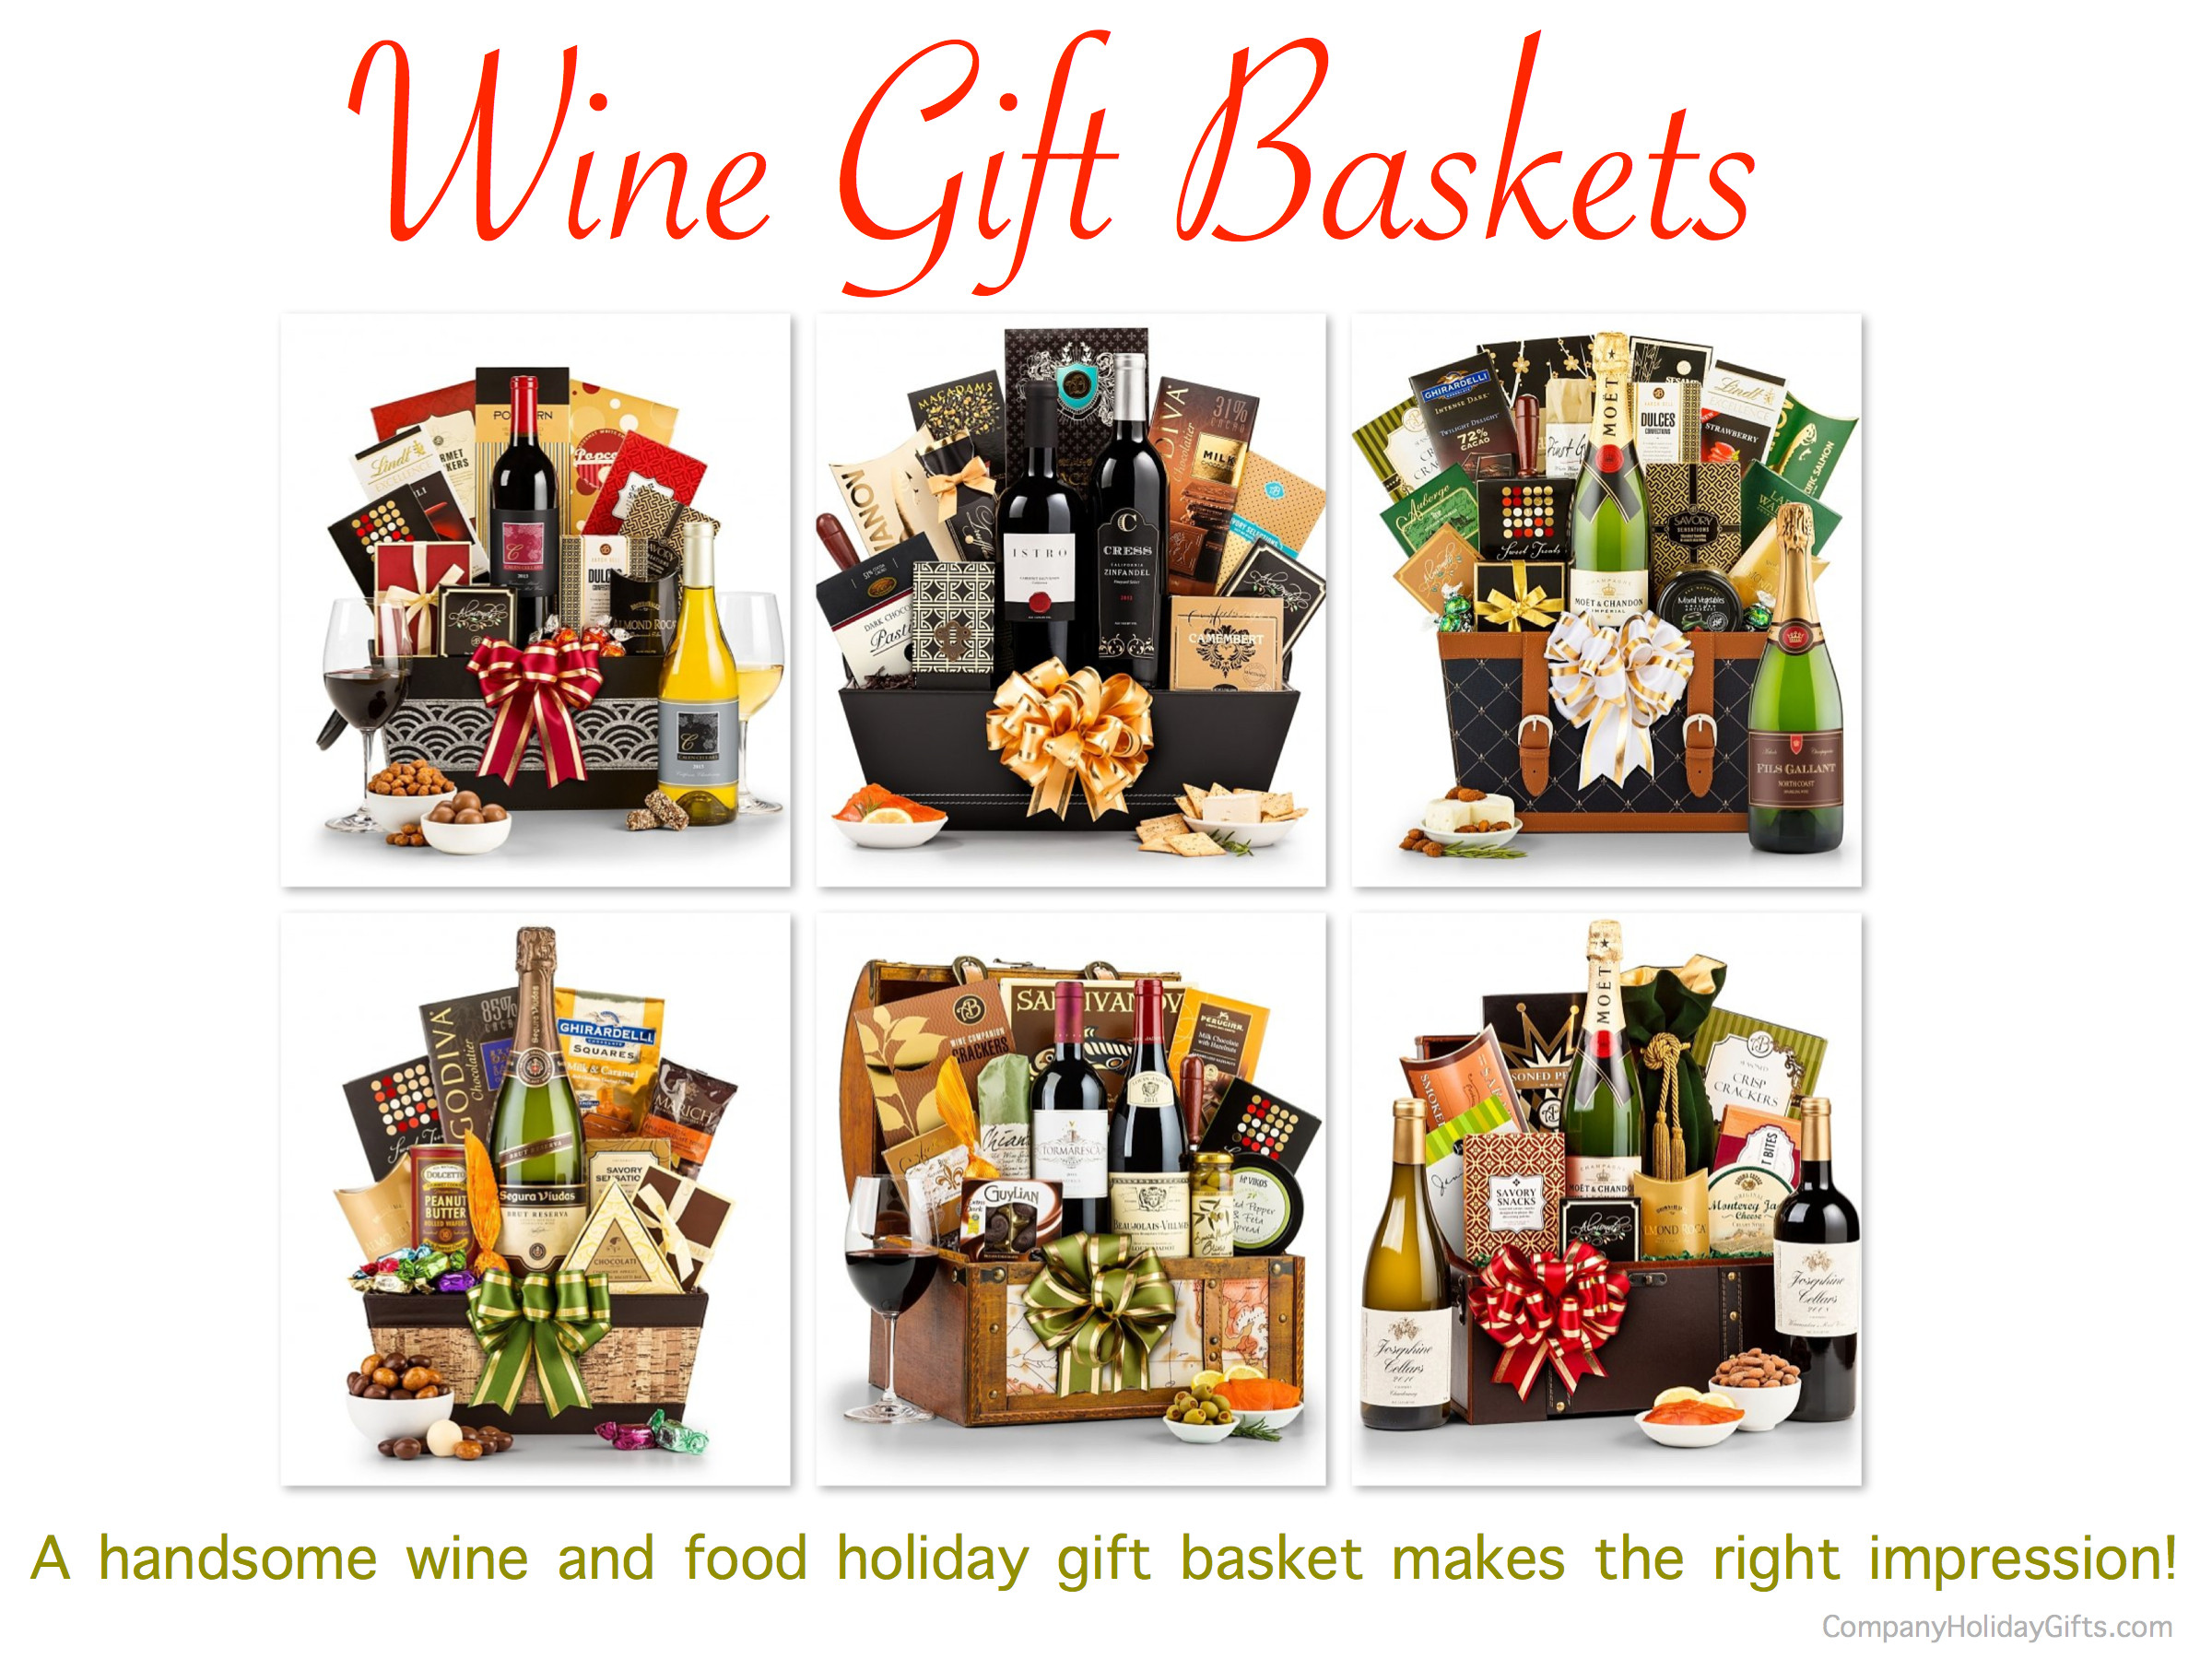 Holiday Client Gift Ideas
 Best Holiday Gifts for Business Associates & Clients